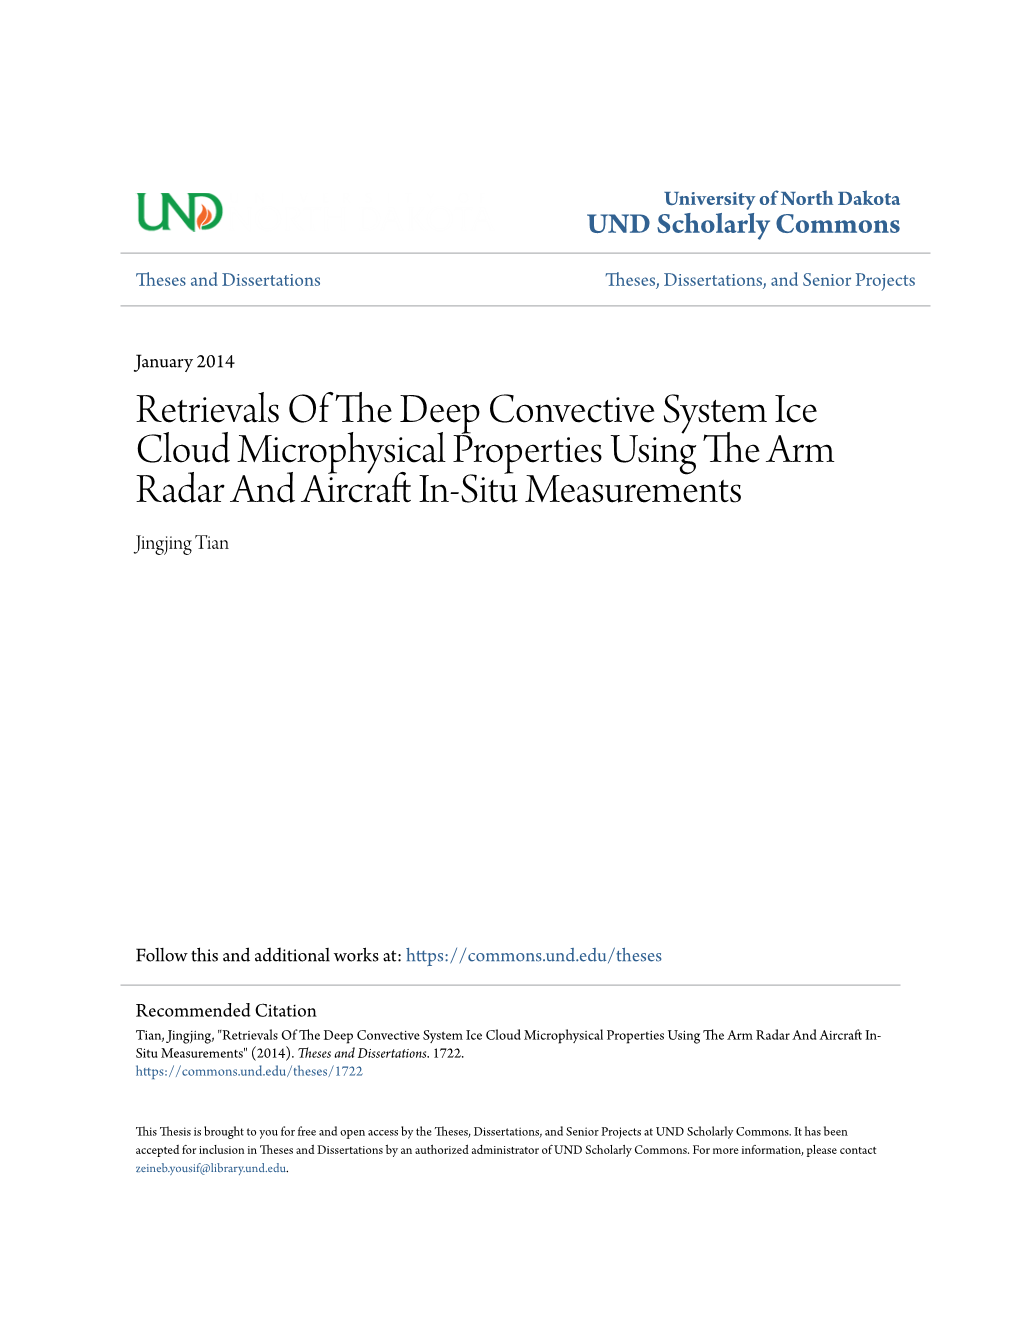 Retrievals of the Deep Convective System Ice Cloud Microphysical Properties Using the Arm Radar and Aircraft In-Situ Measurements